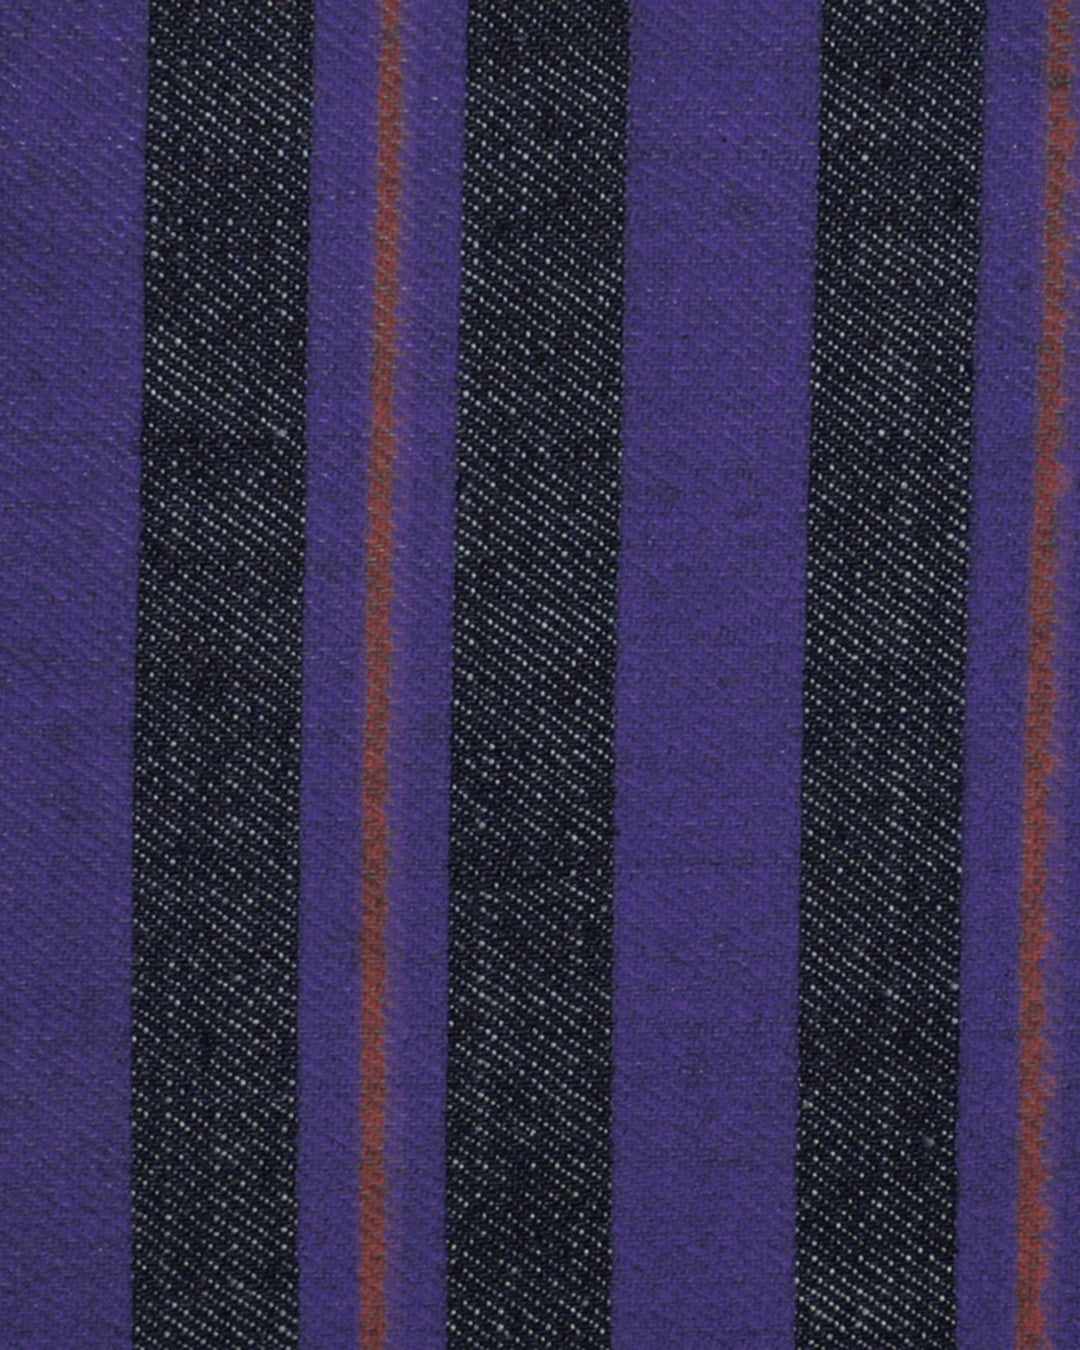 Close view of custom denim jeans for men by Luxire with purple stripes